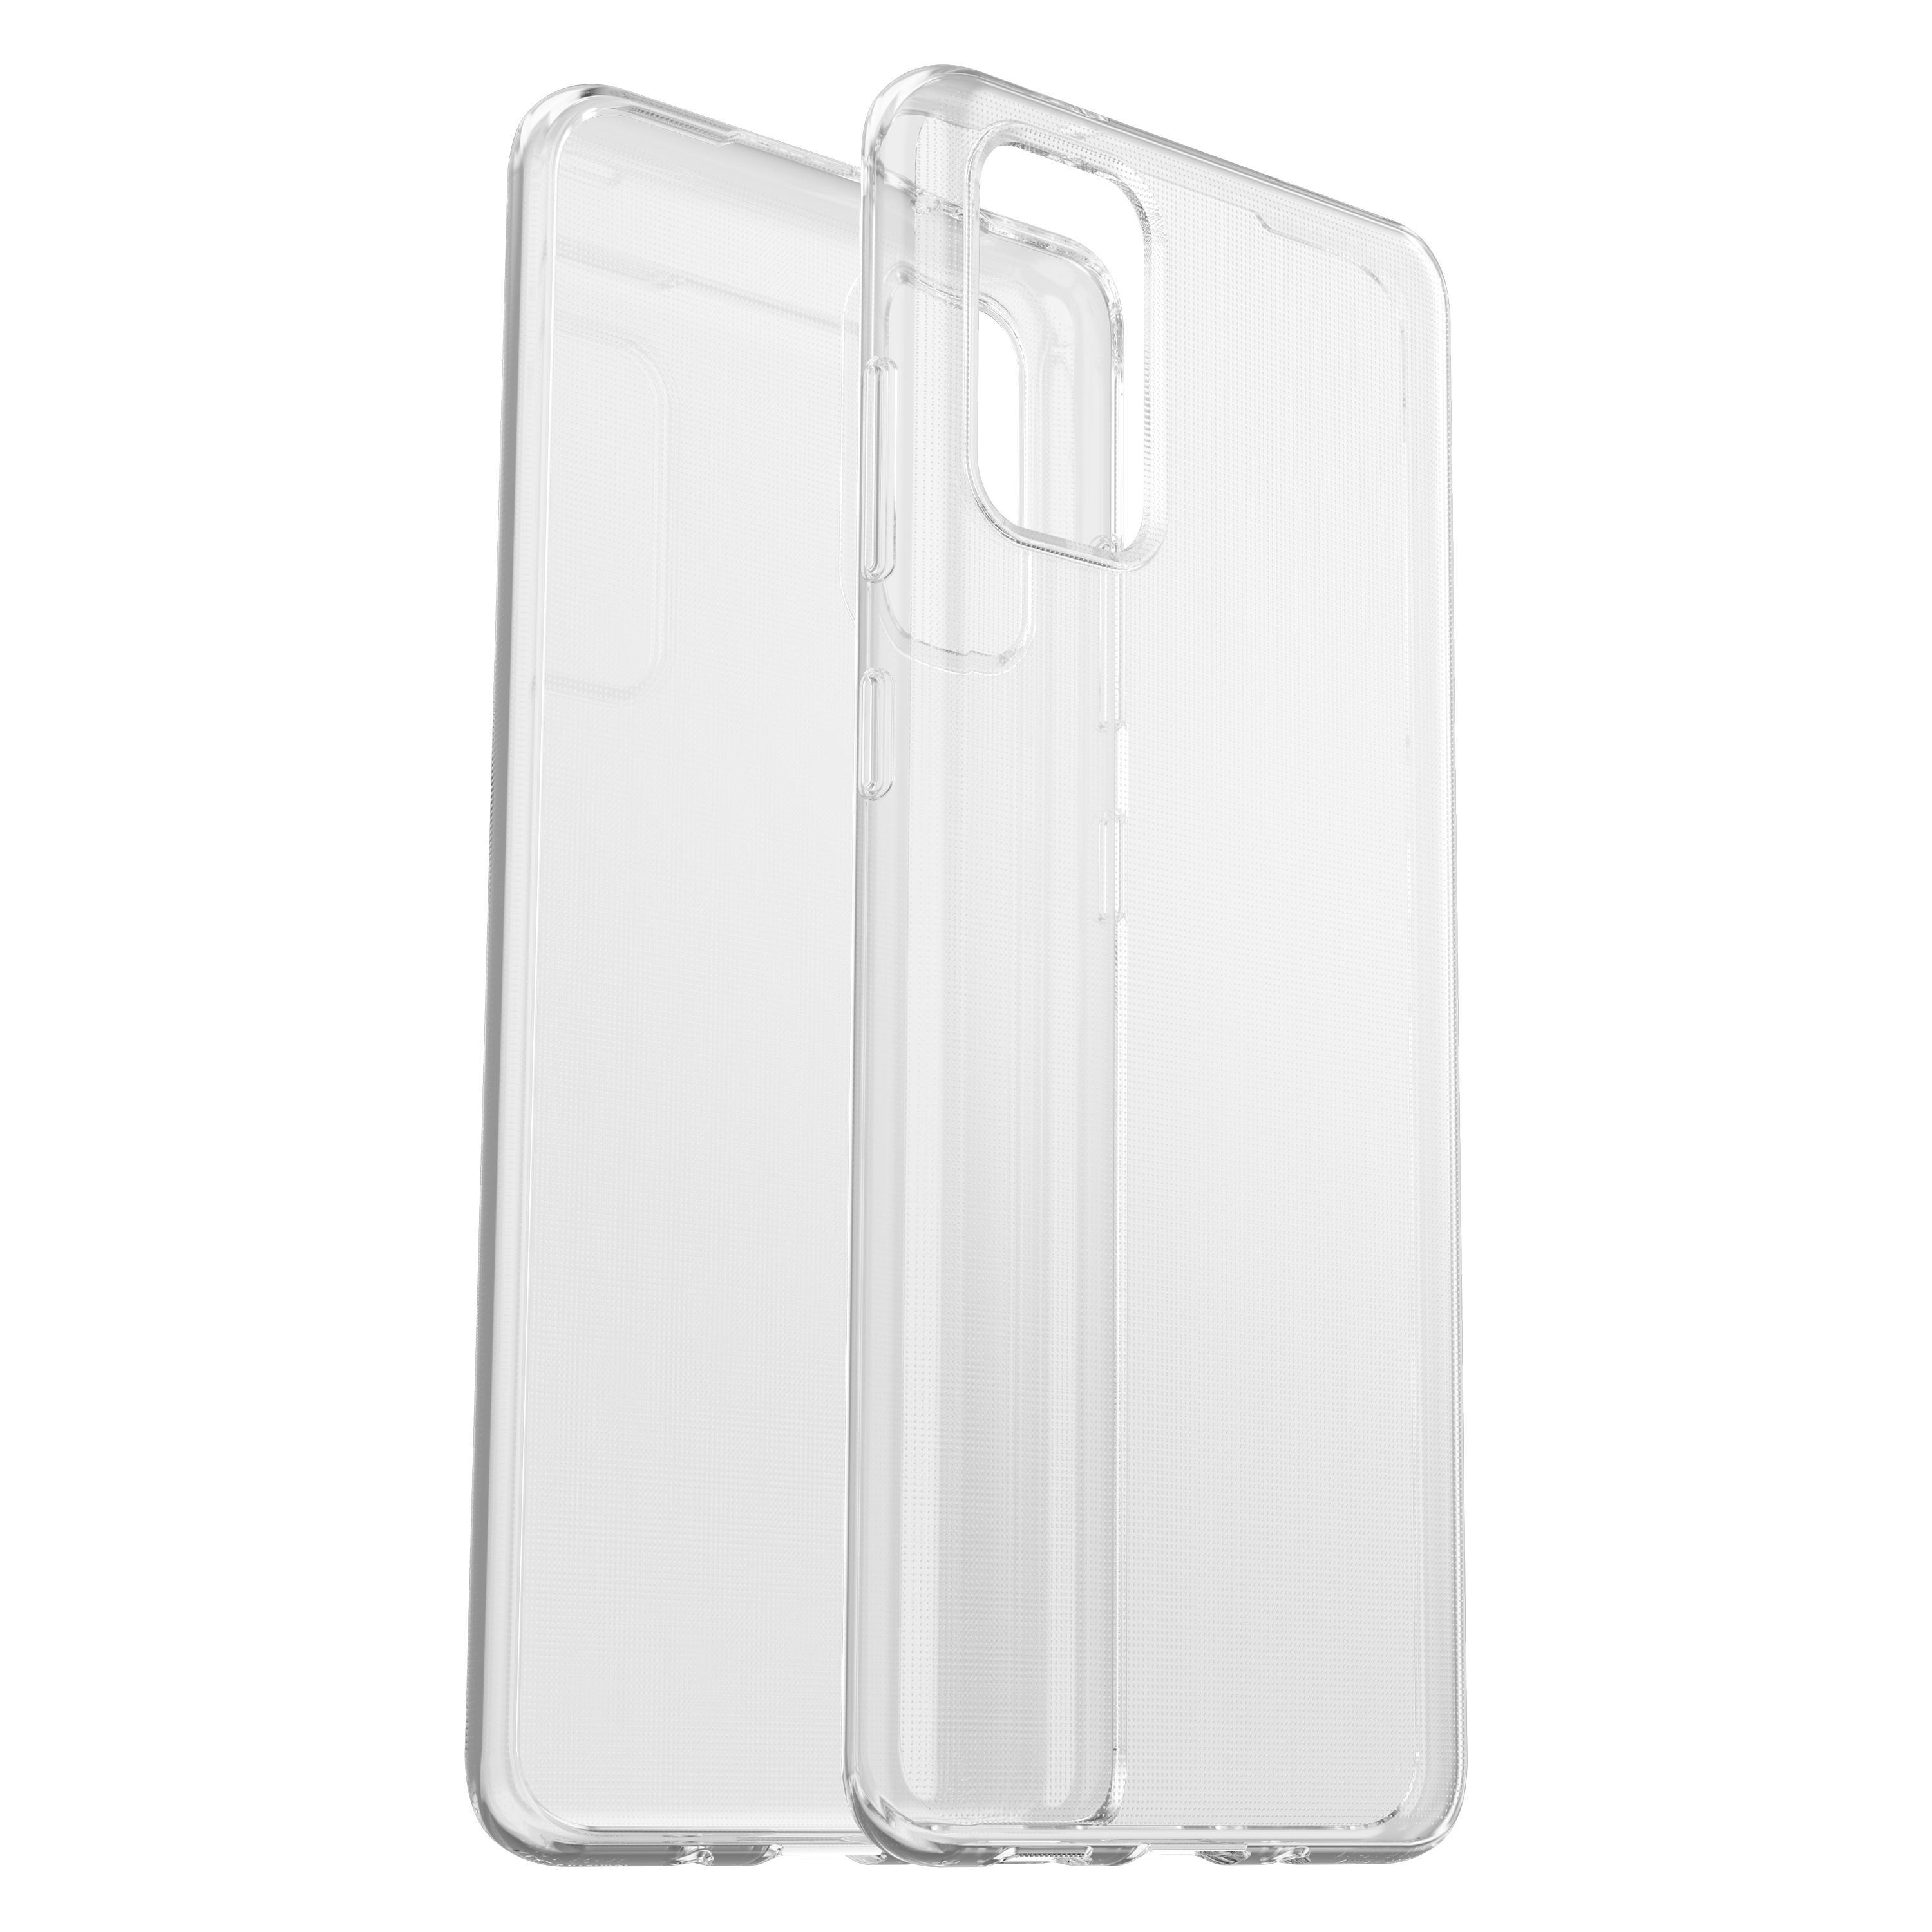 Backcover, Transparent 77-64171, OTTERBOX Galaxy S20+, Samsung,